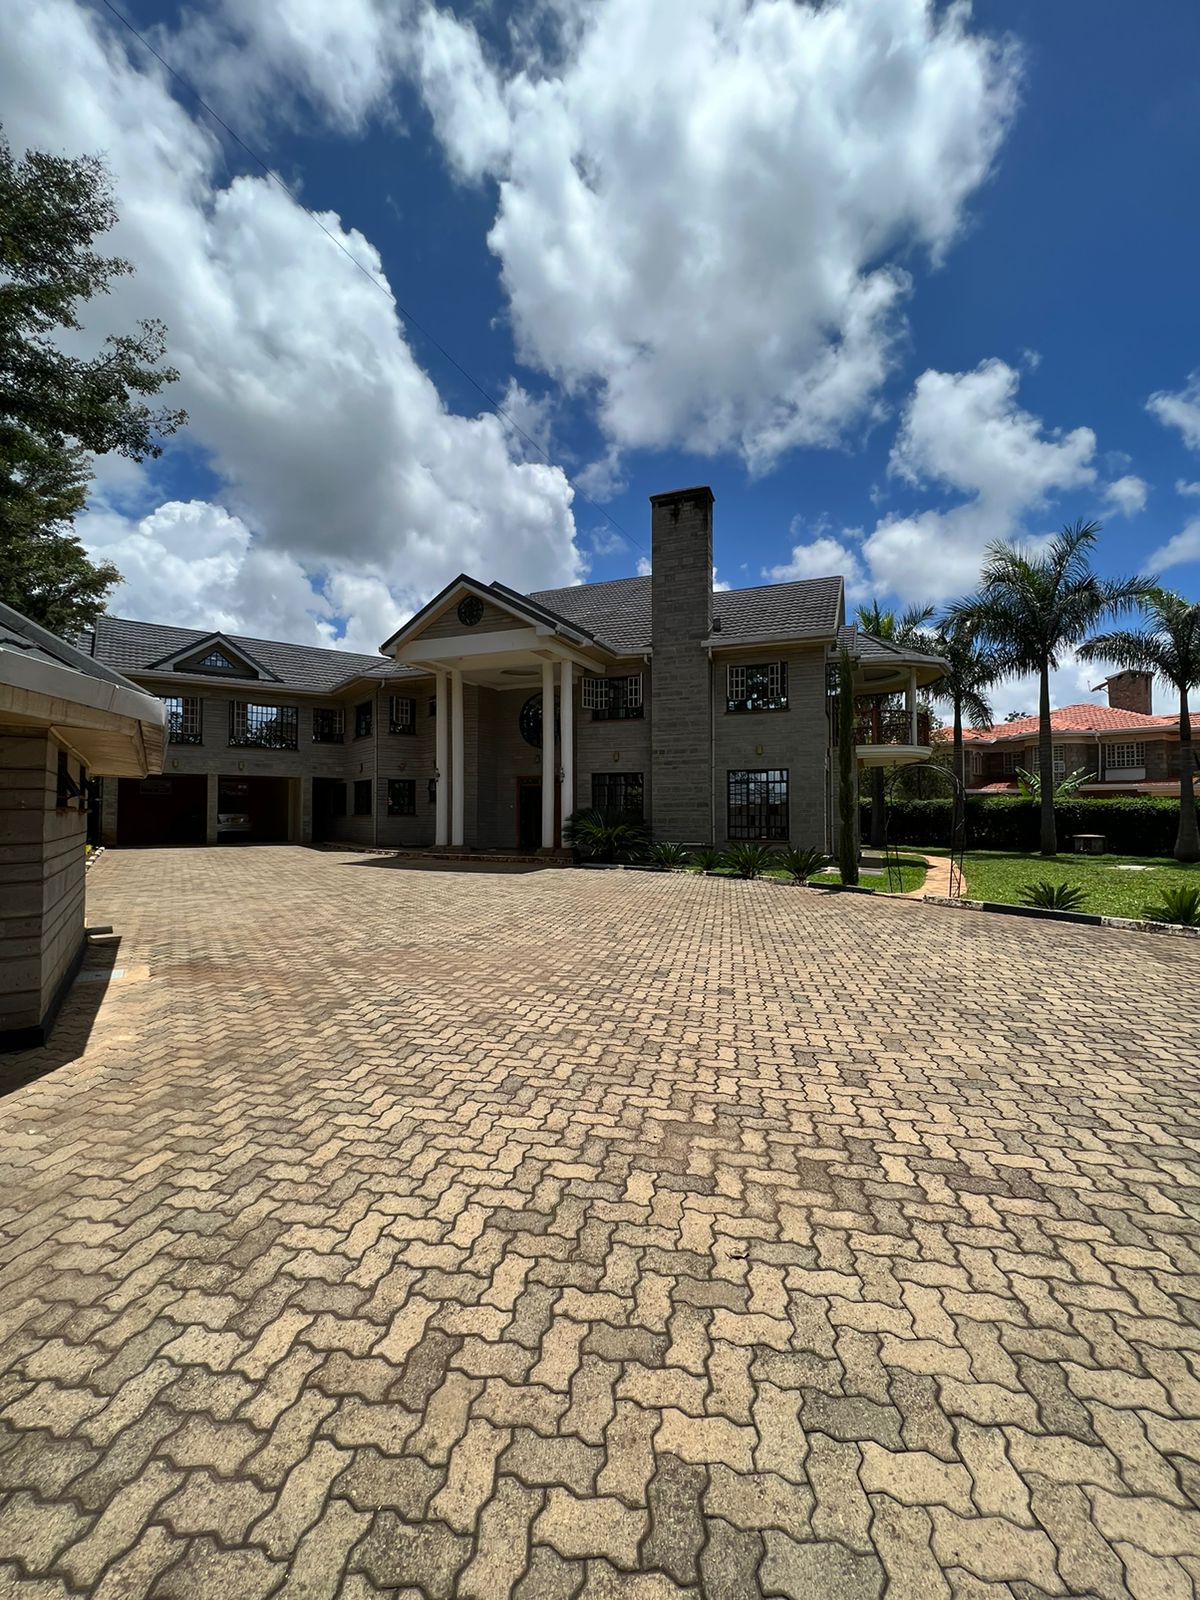 Runda 6 bedroom house all bedroom en-suite on 0.5 Acres. Master with a balcony and study/ Sale at 150Million. Musili Homes